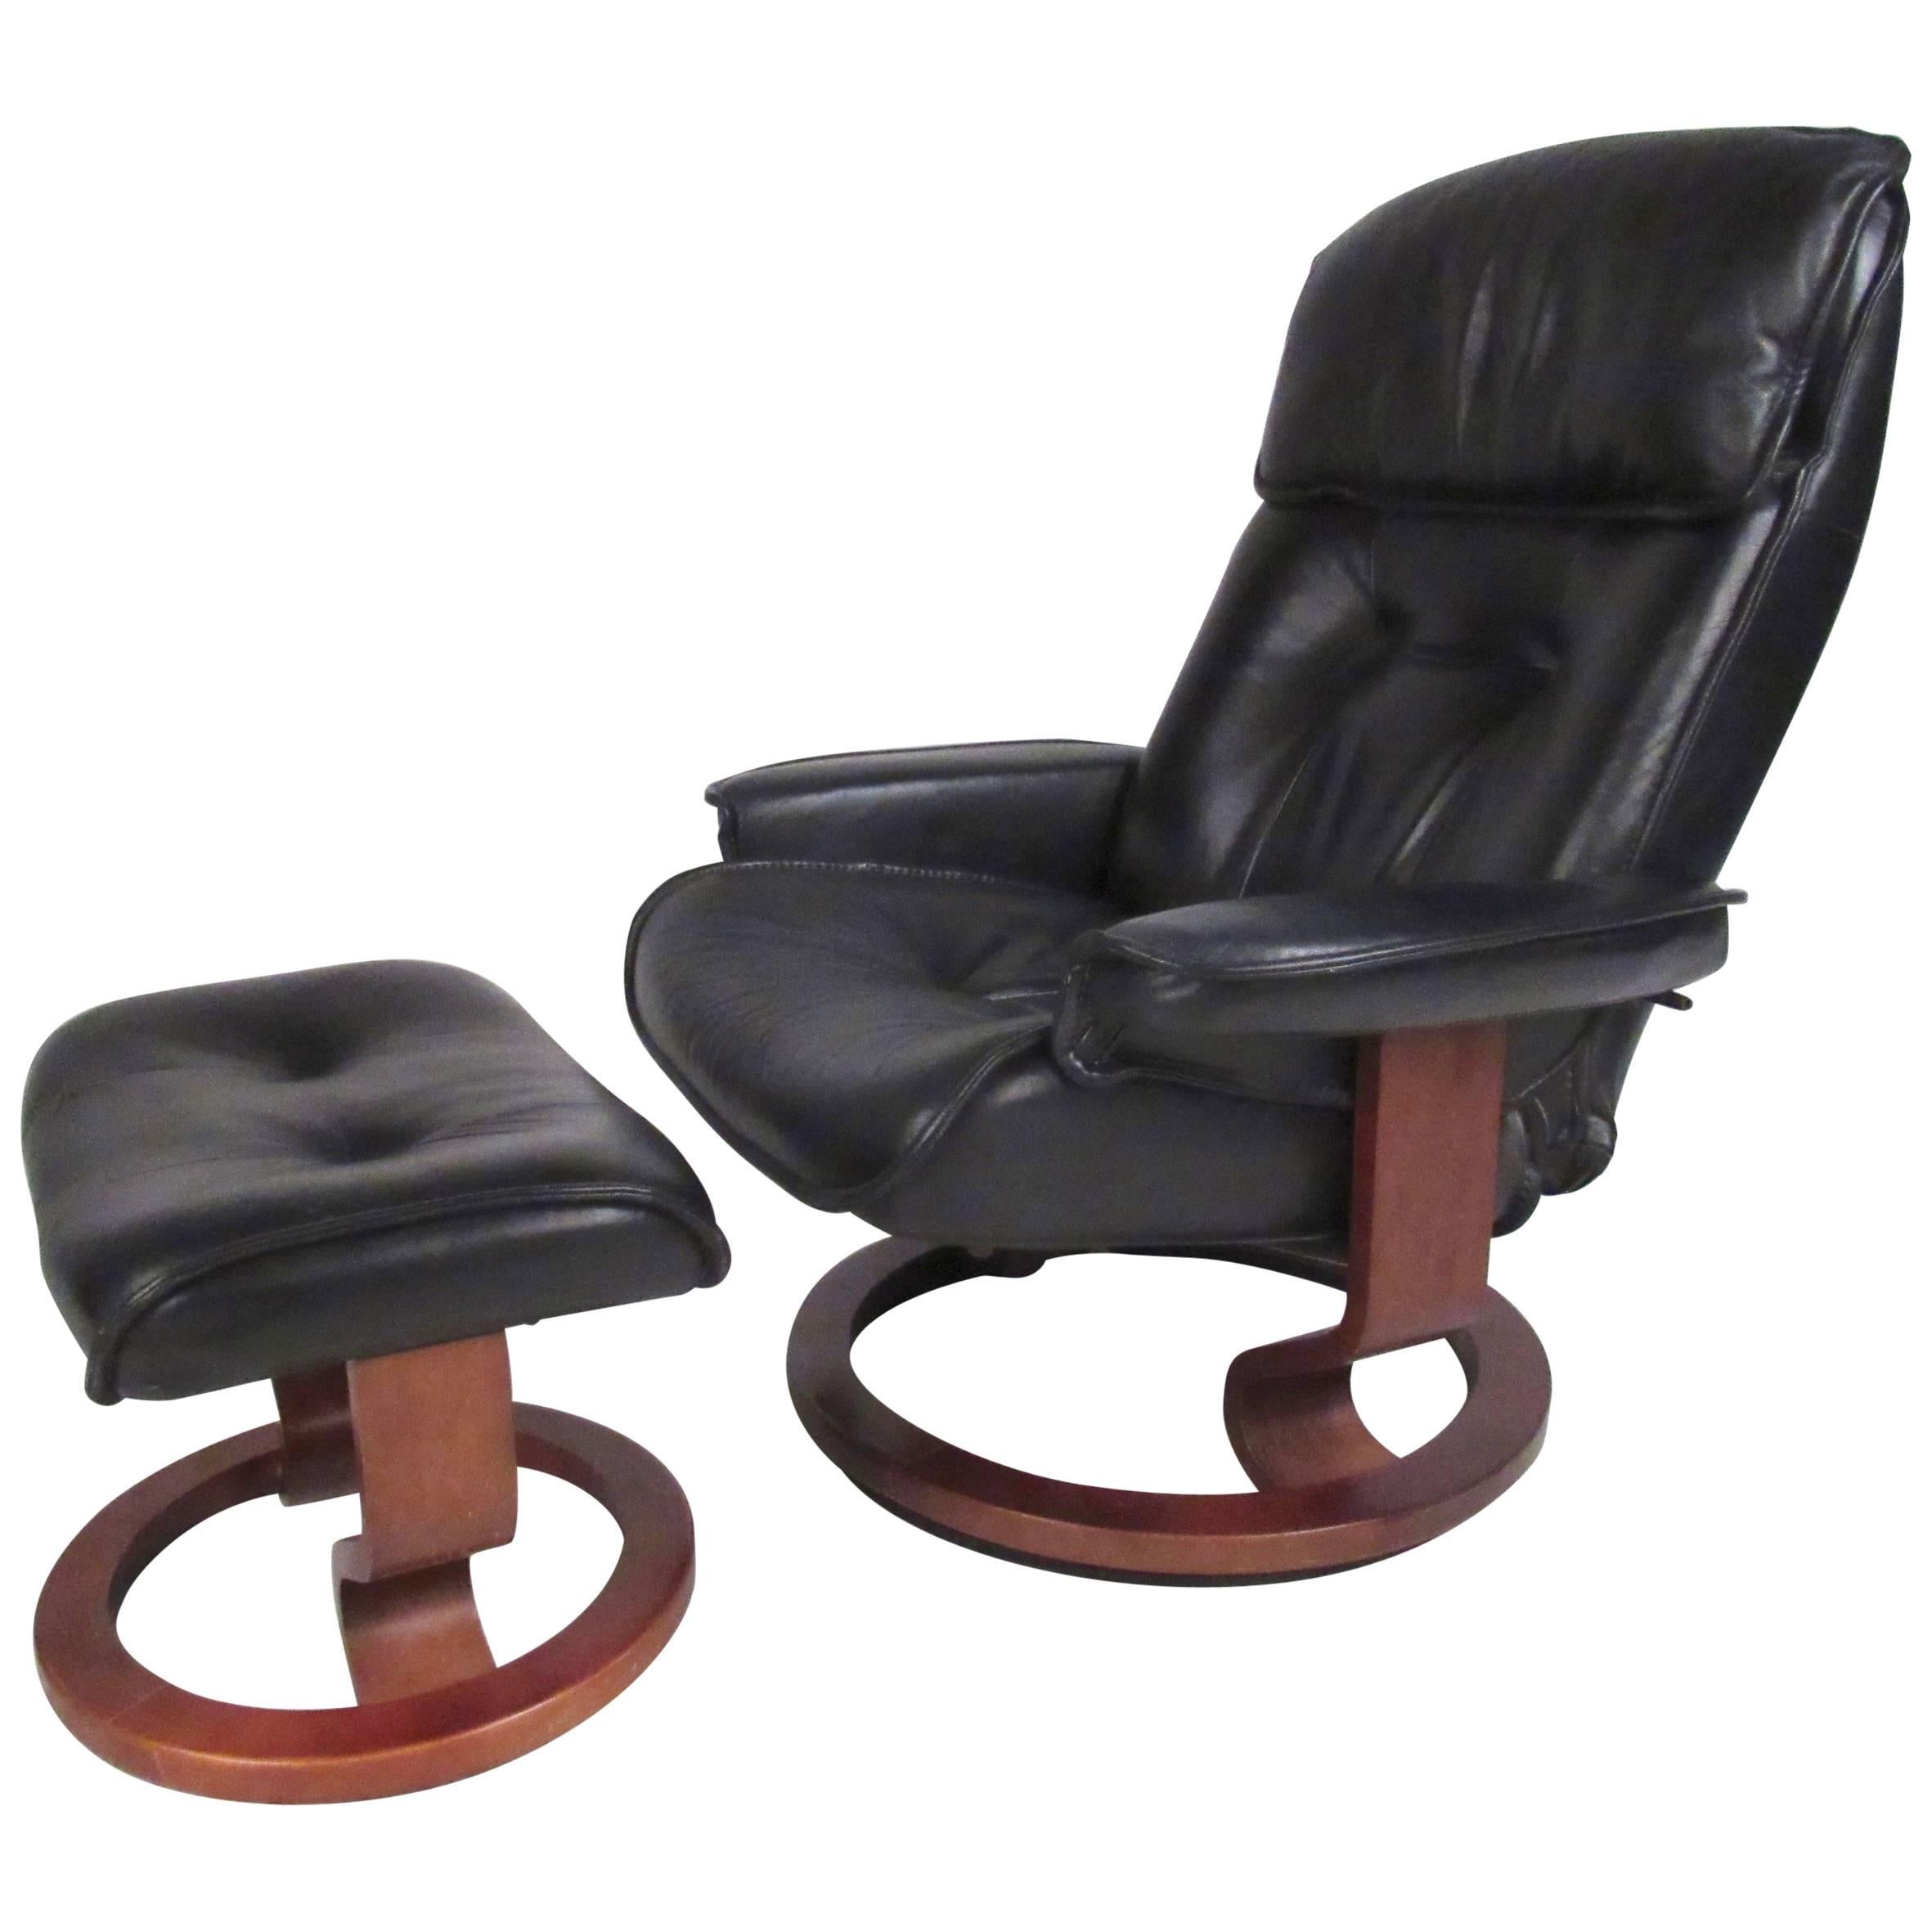 Danish Modern Leather Recliner For, Leather Recliner Swivel